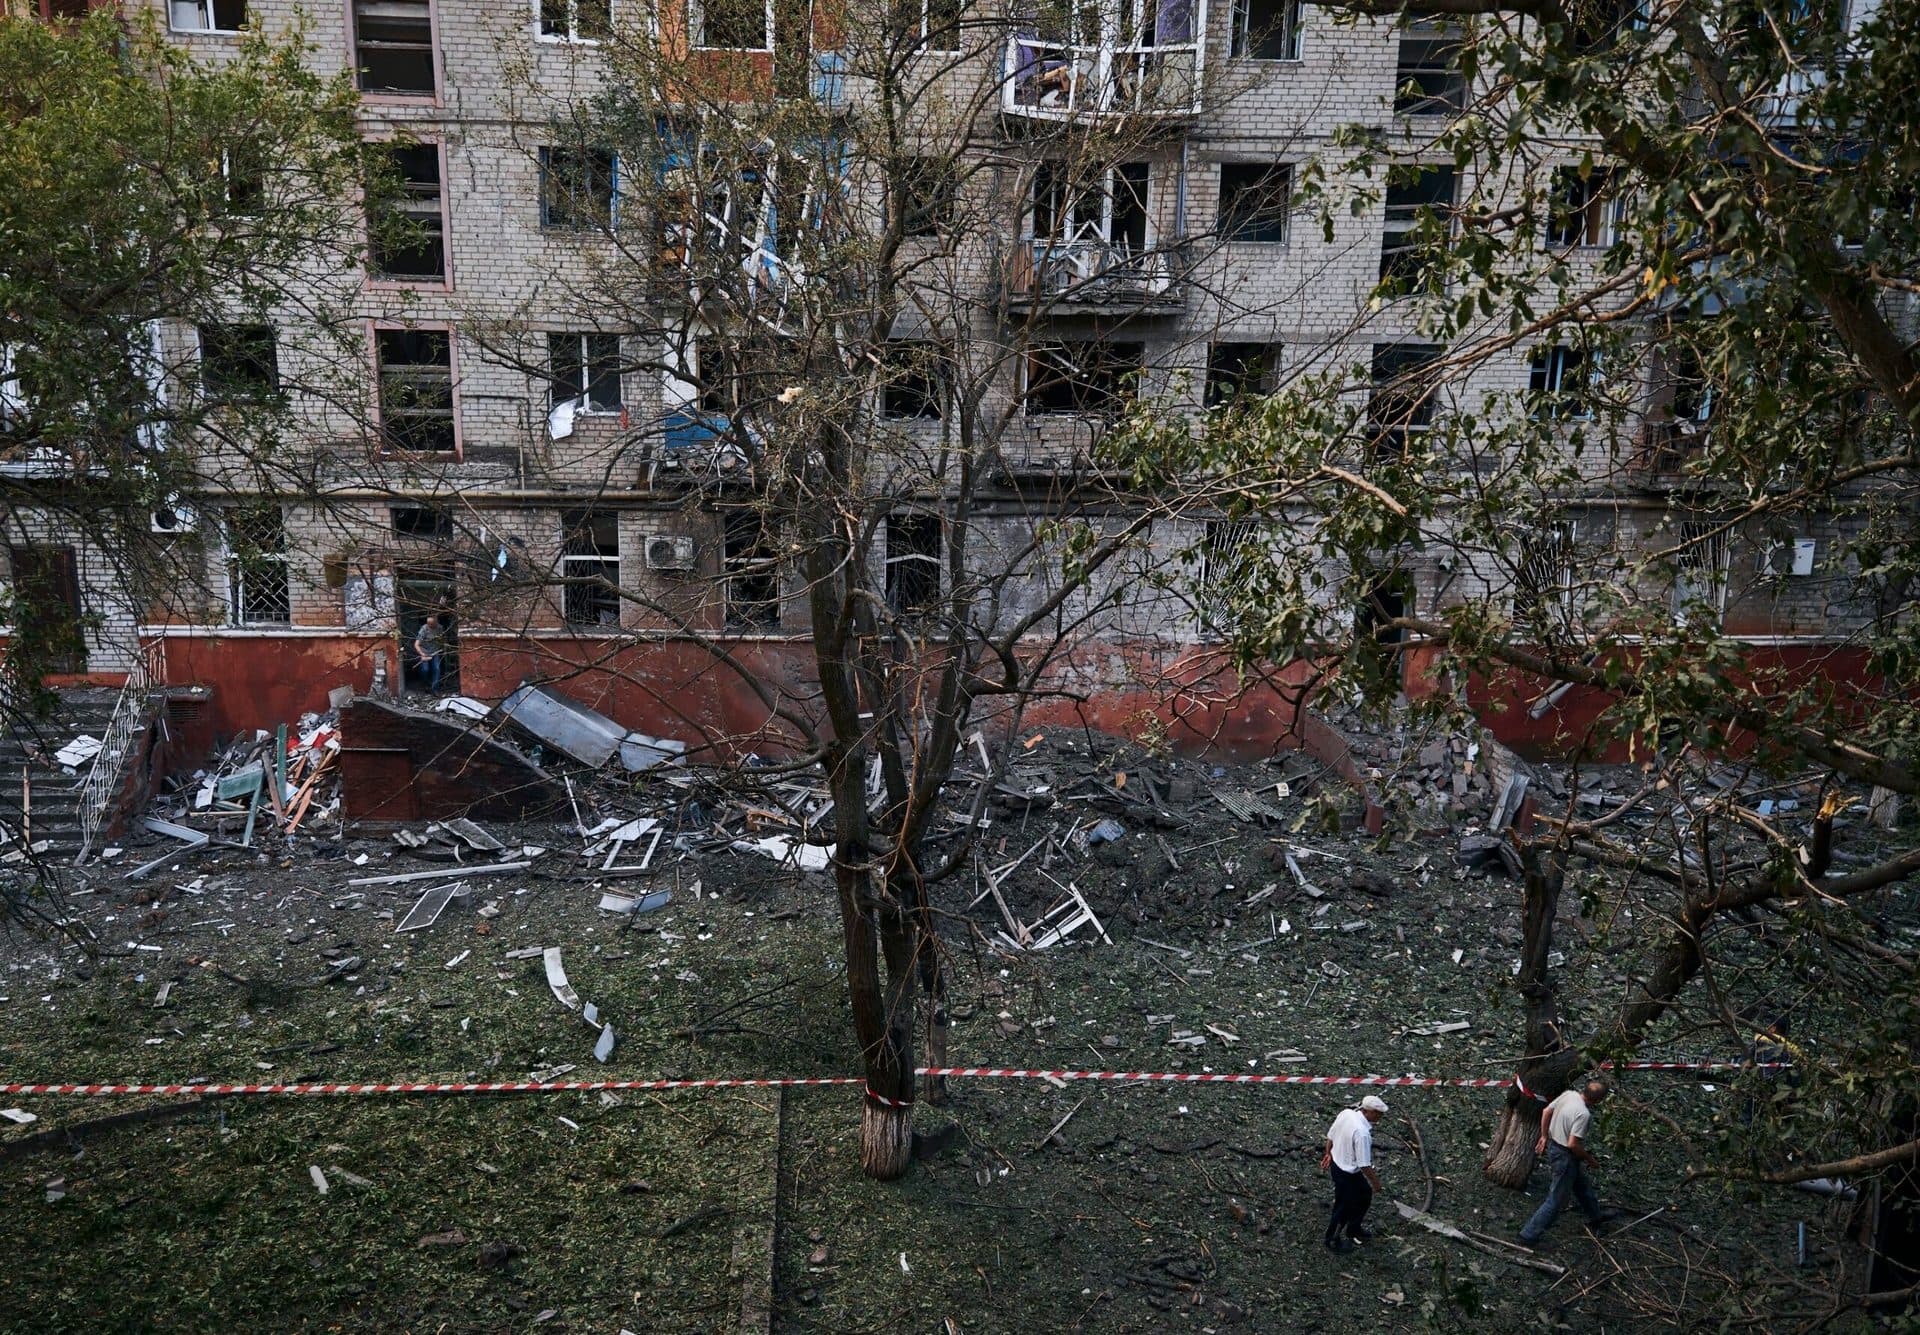 Local residents walk past a damaged building after a rocket attack early Wednesday morning, in Kramatorsk